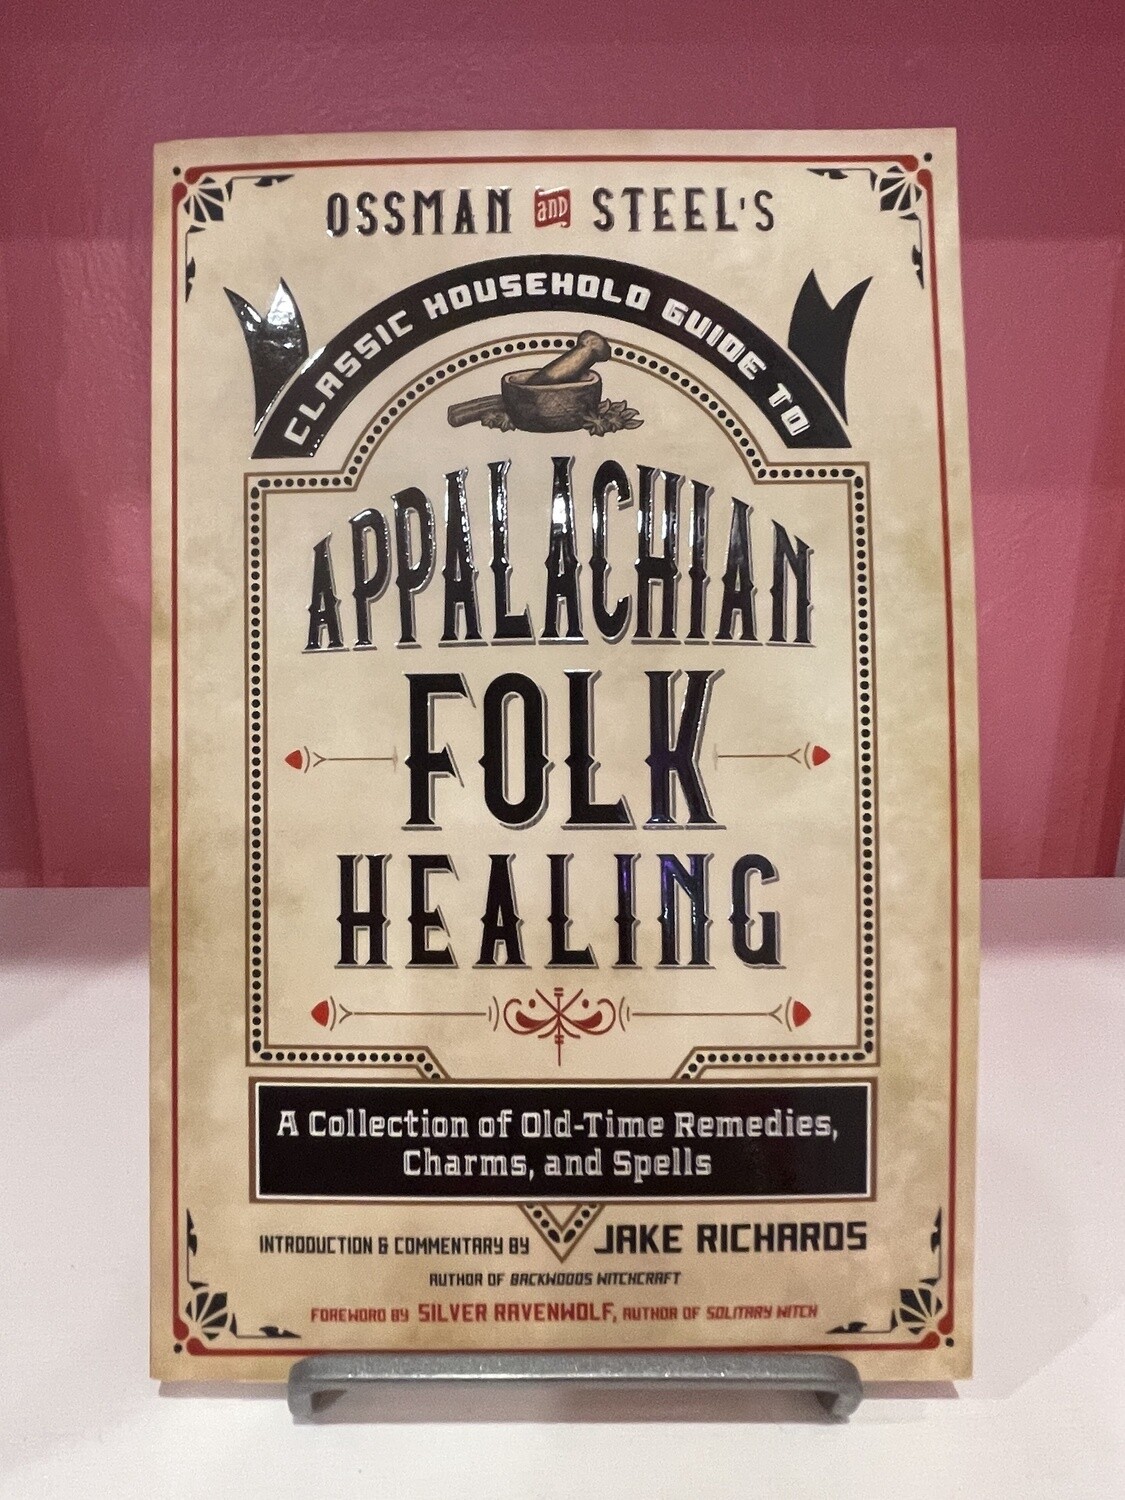 Ossman & Steel's Classic Household Guide to Appalachian Folk Healing: A Collection of OldTime Remedies, Charms, and Spells